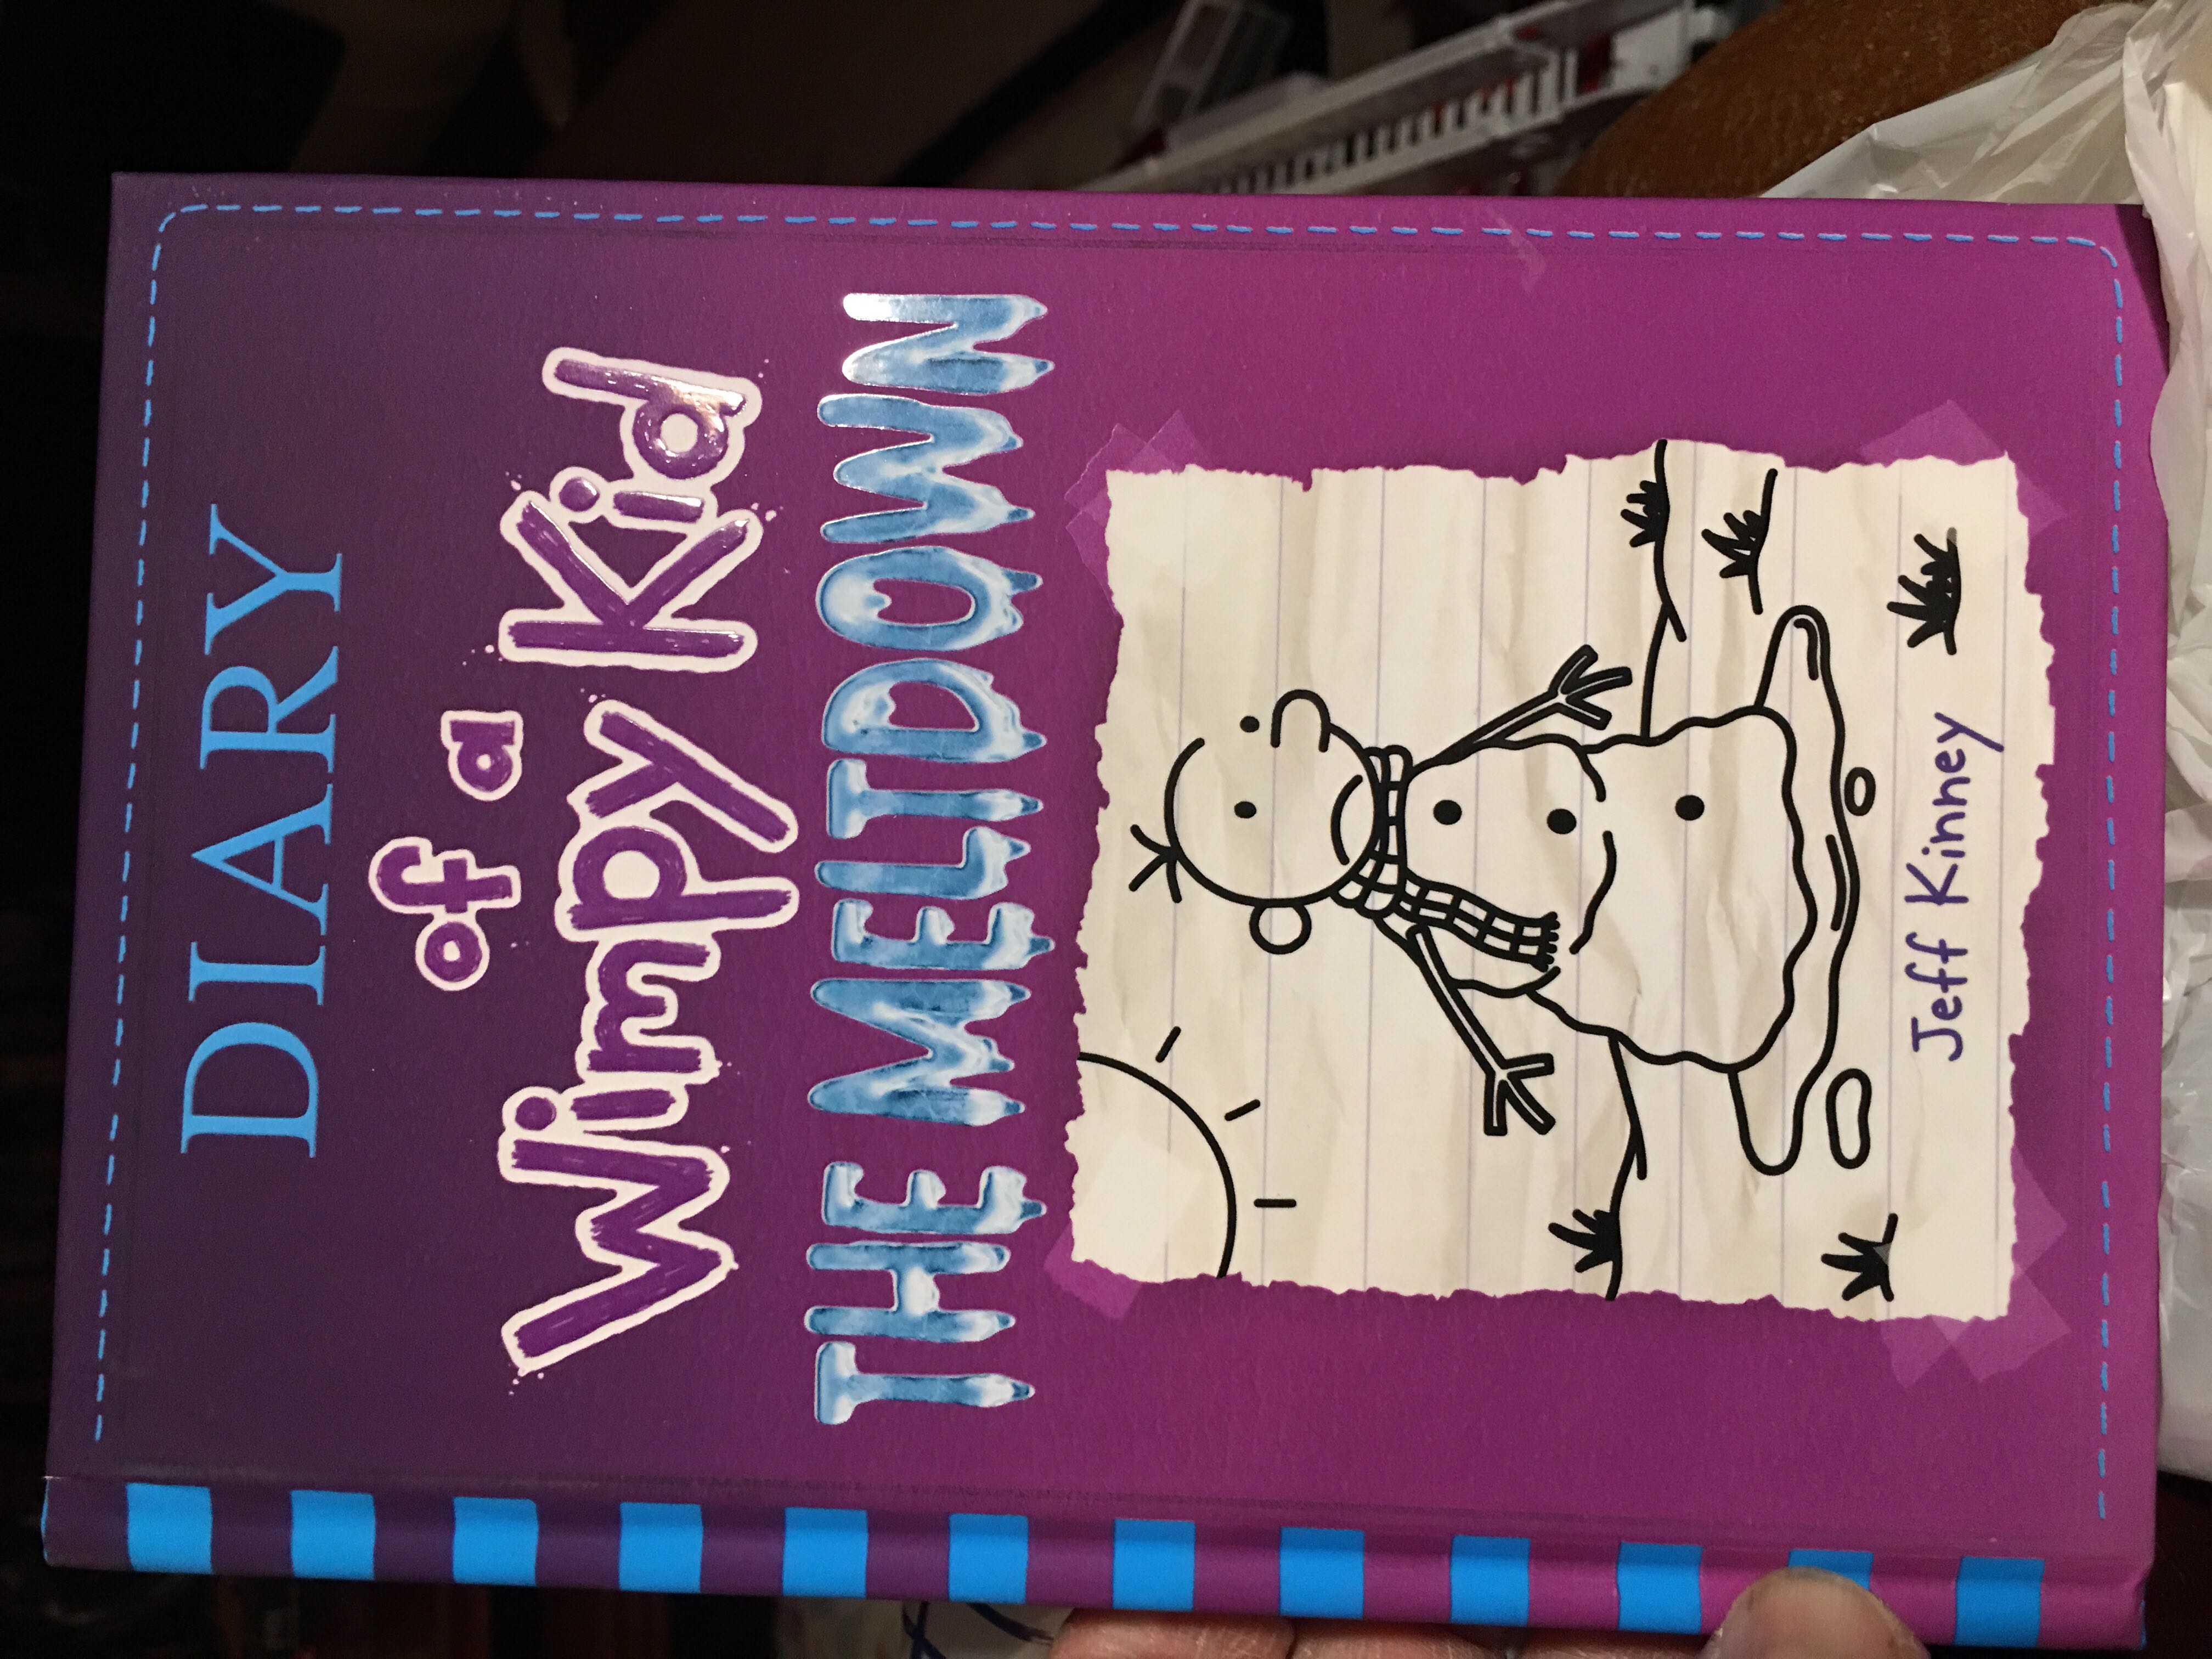 Meltdown, The - Jeff Kinney (Amulet Books - Hardcover) book collectible [Barcode 9781419727436] - Main Image 1